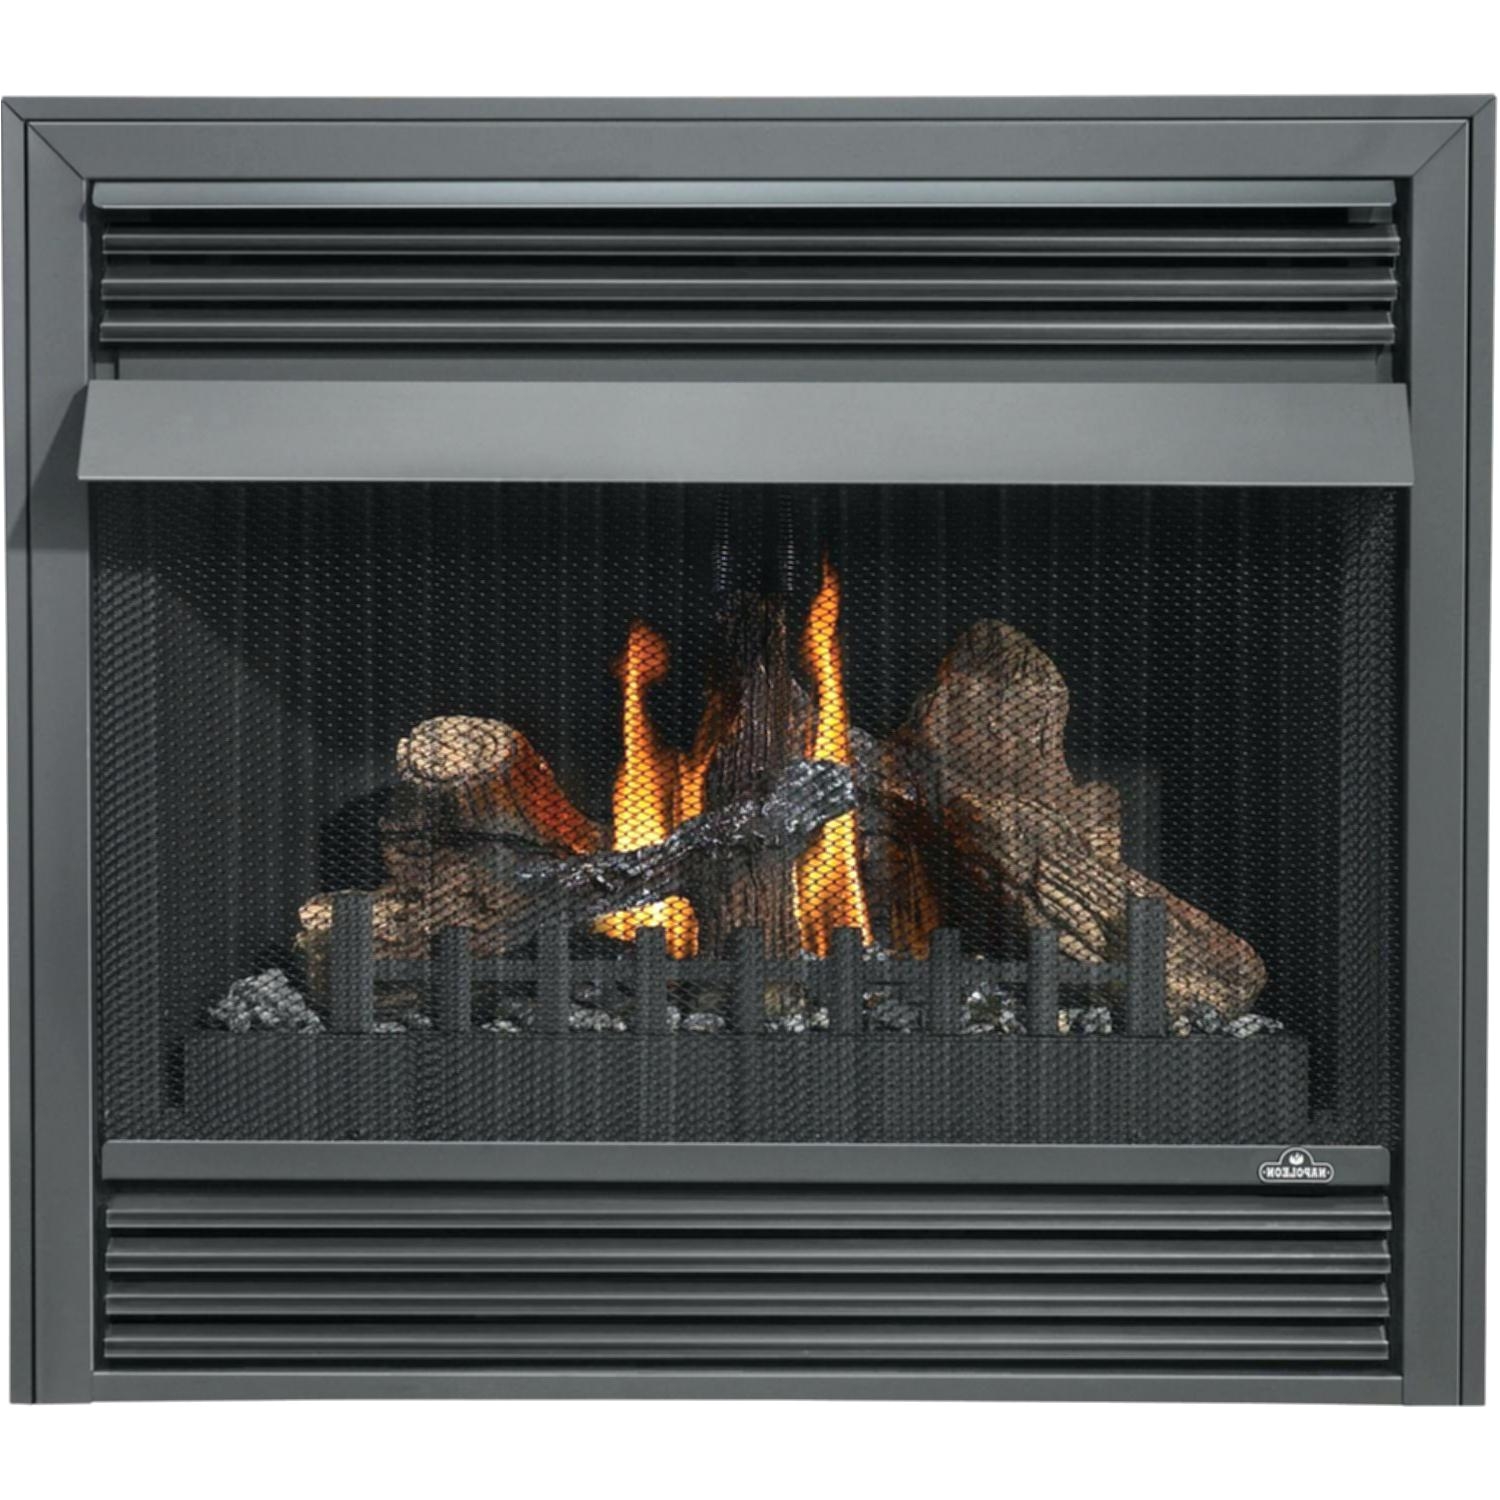 lennox gas fireplace parts canada gas fireplace parts simple lennox gas fireplace parts with lennox of lennox gas fireplace parts canada